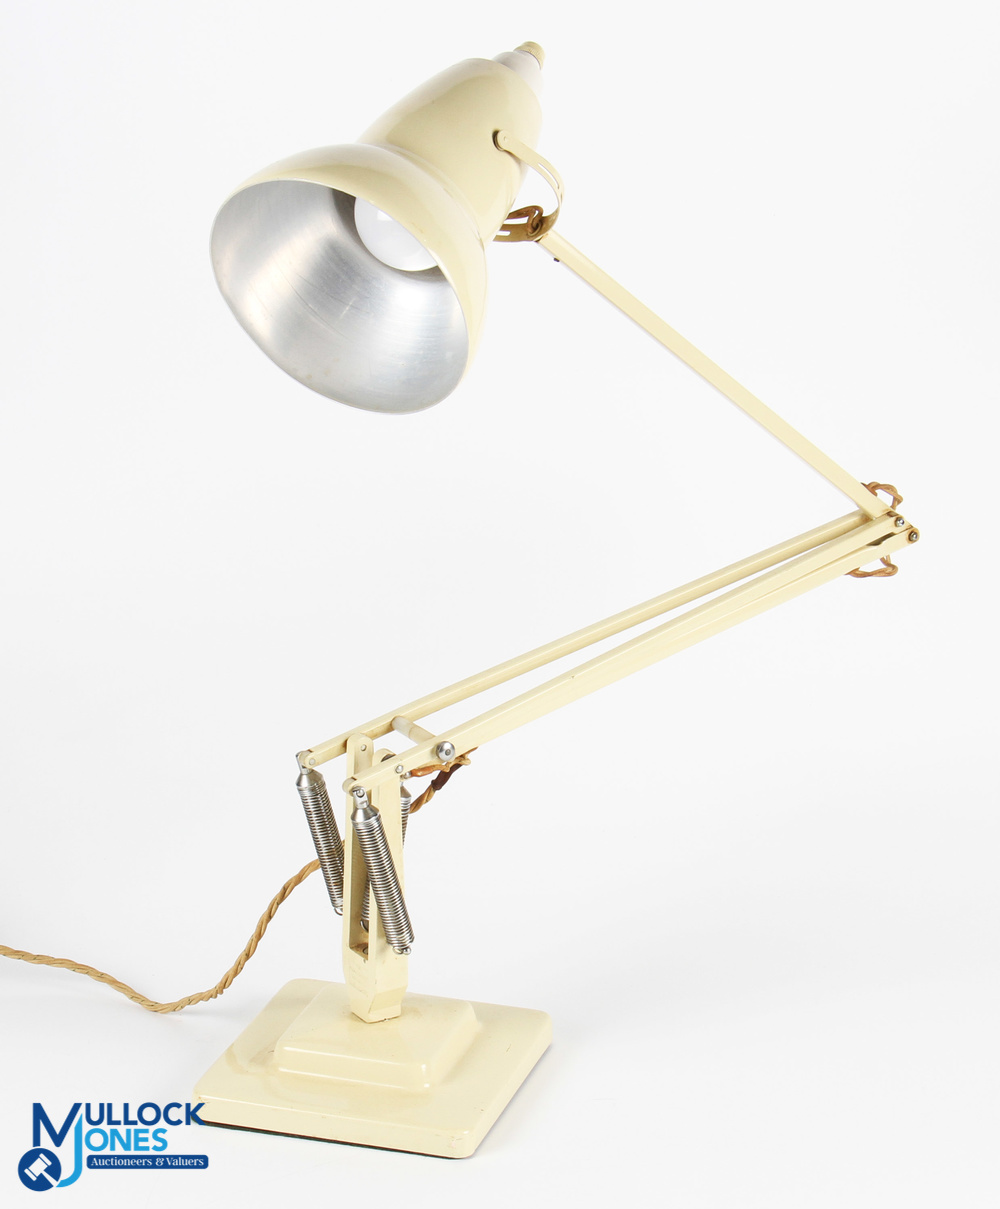 Herbert Terry Cream Anglepoise Desk lamp. In good vintage condition with original Bakelite fittings.